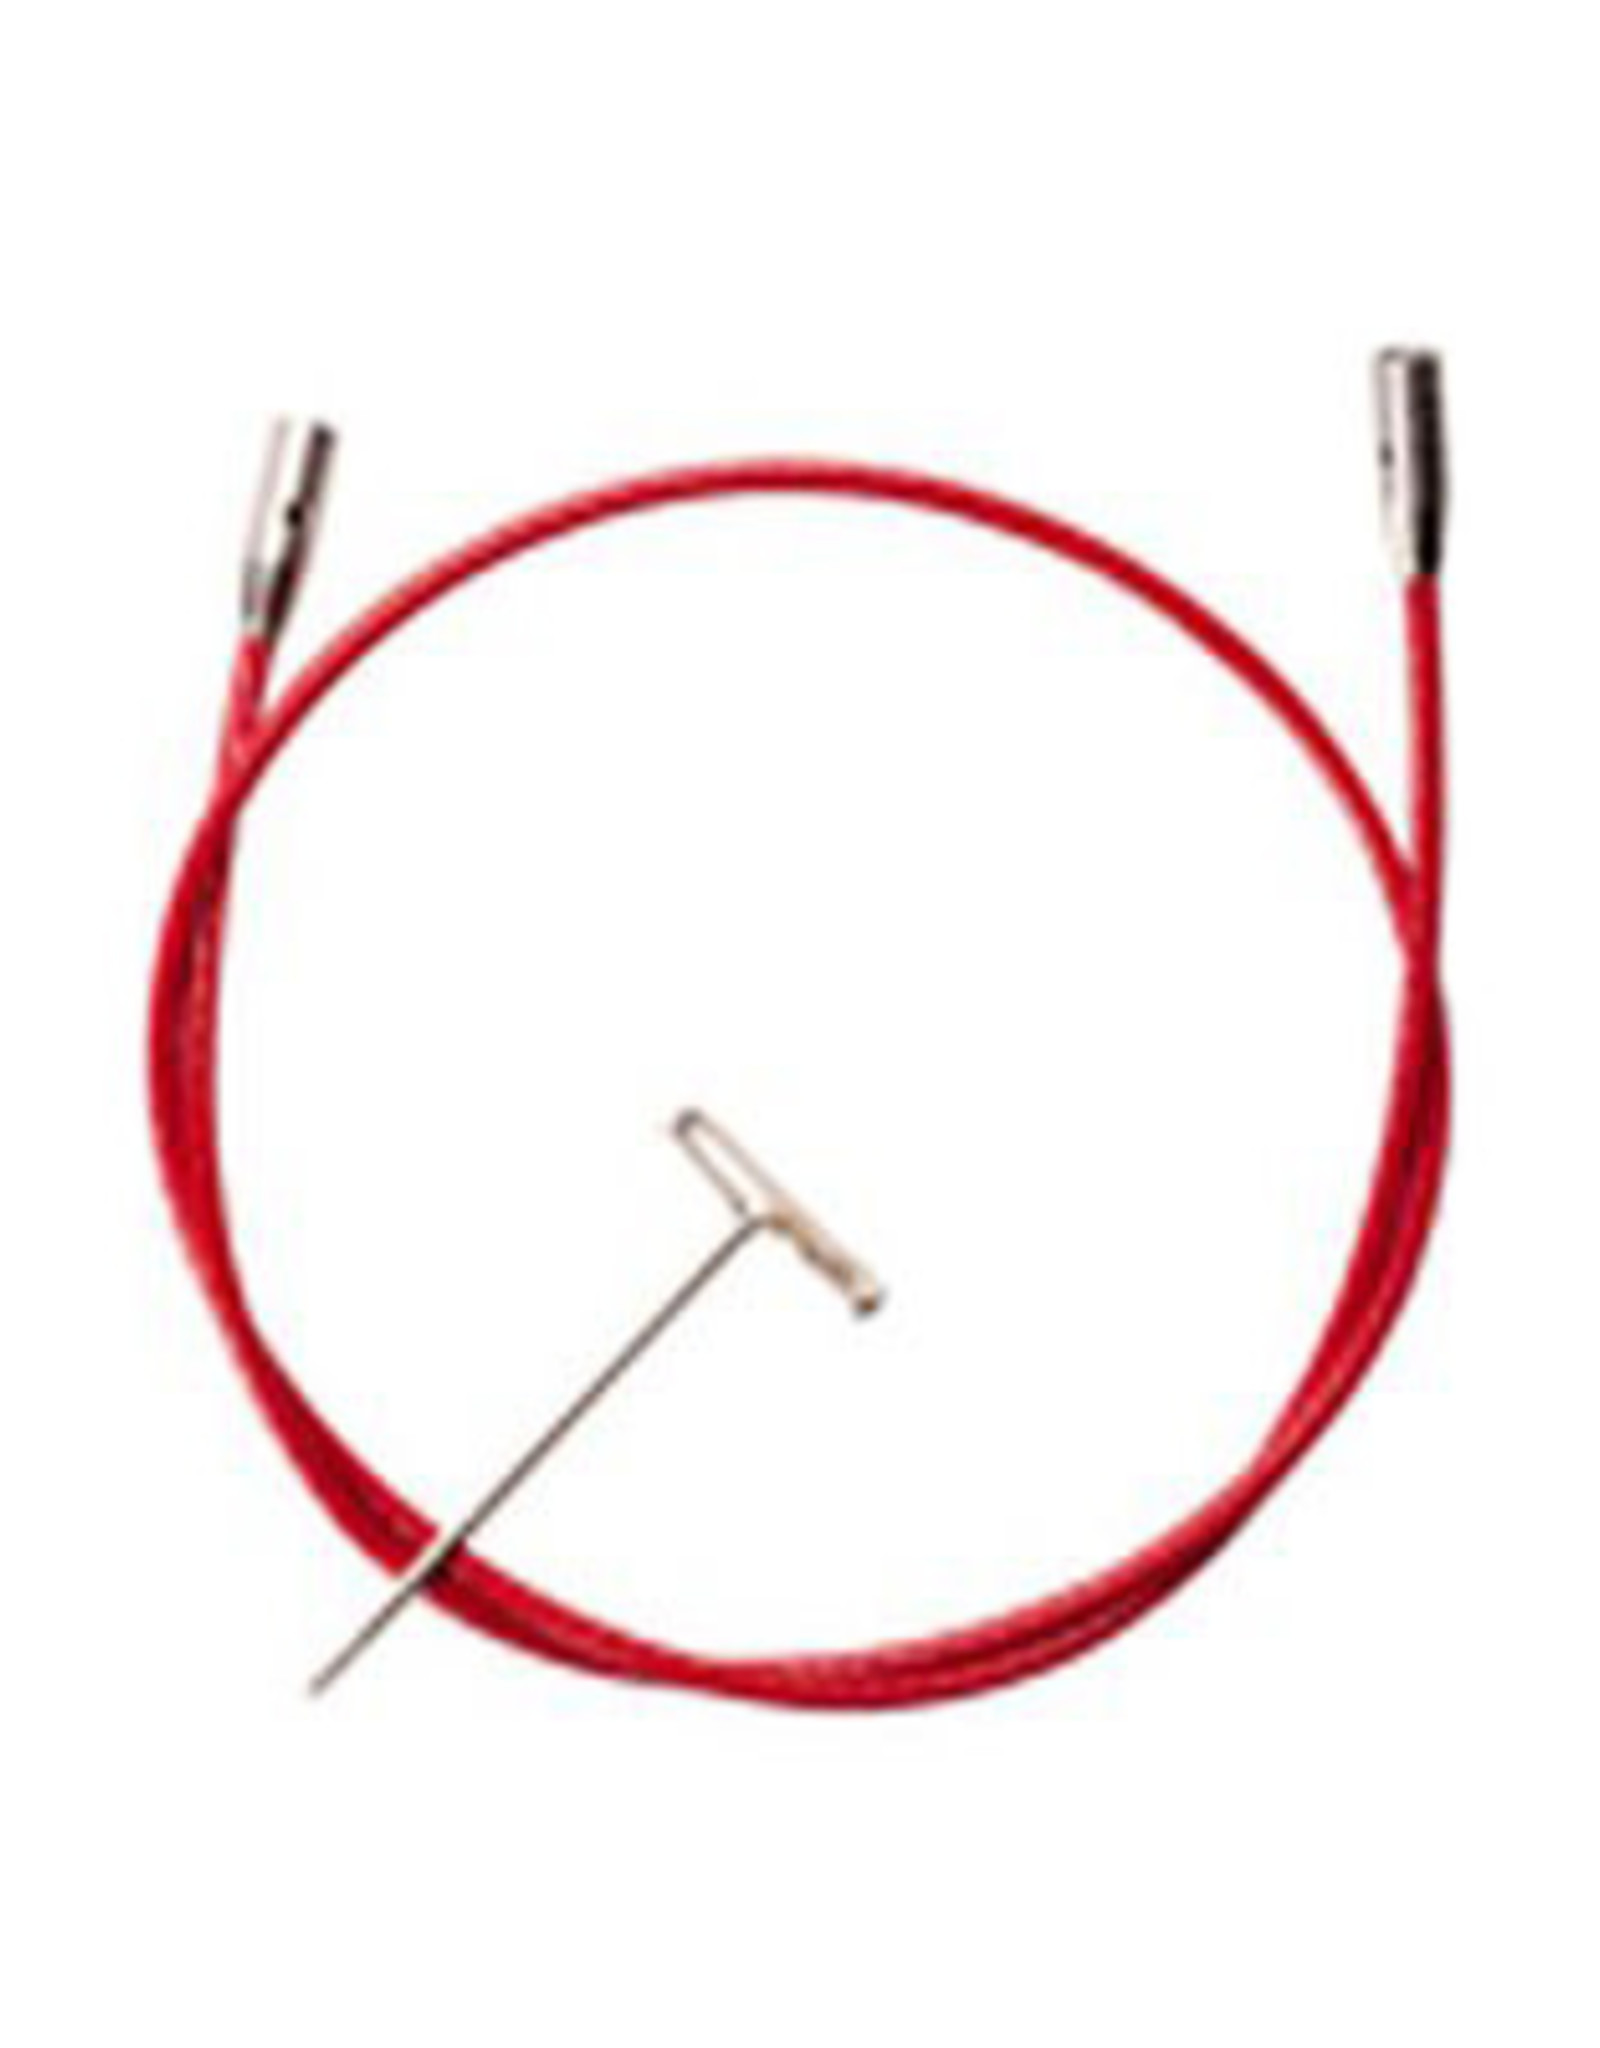 ChiaoGoo Red Lace Cables - 37" Small